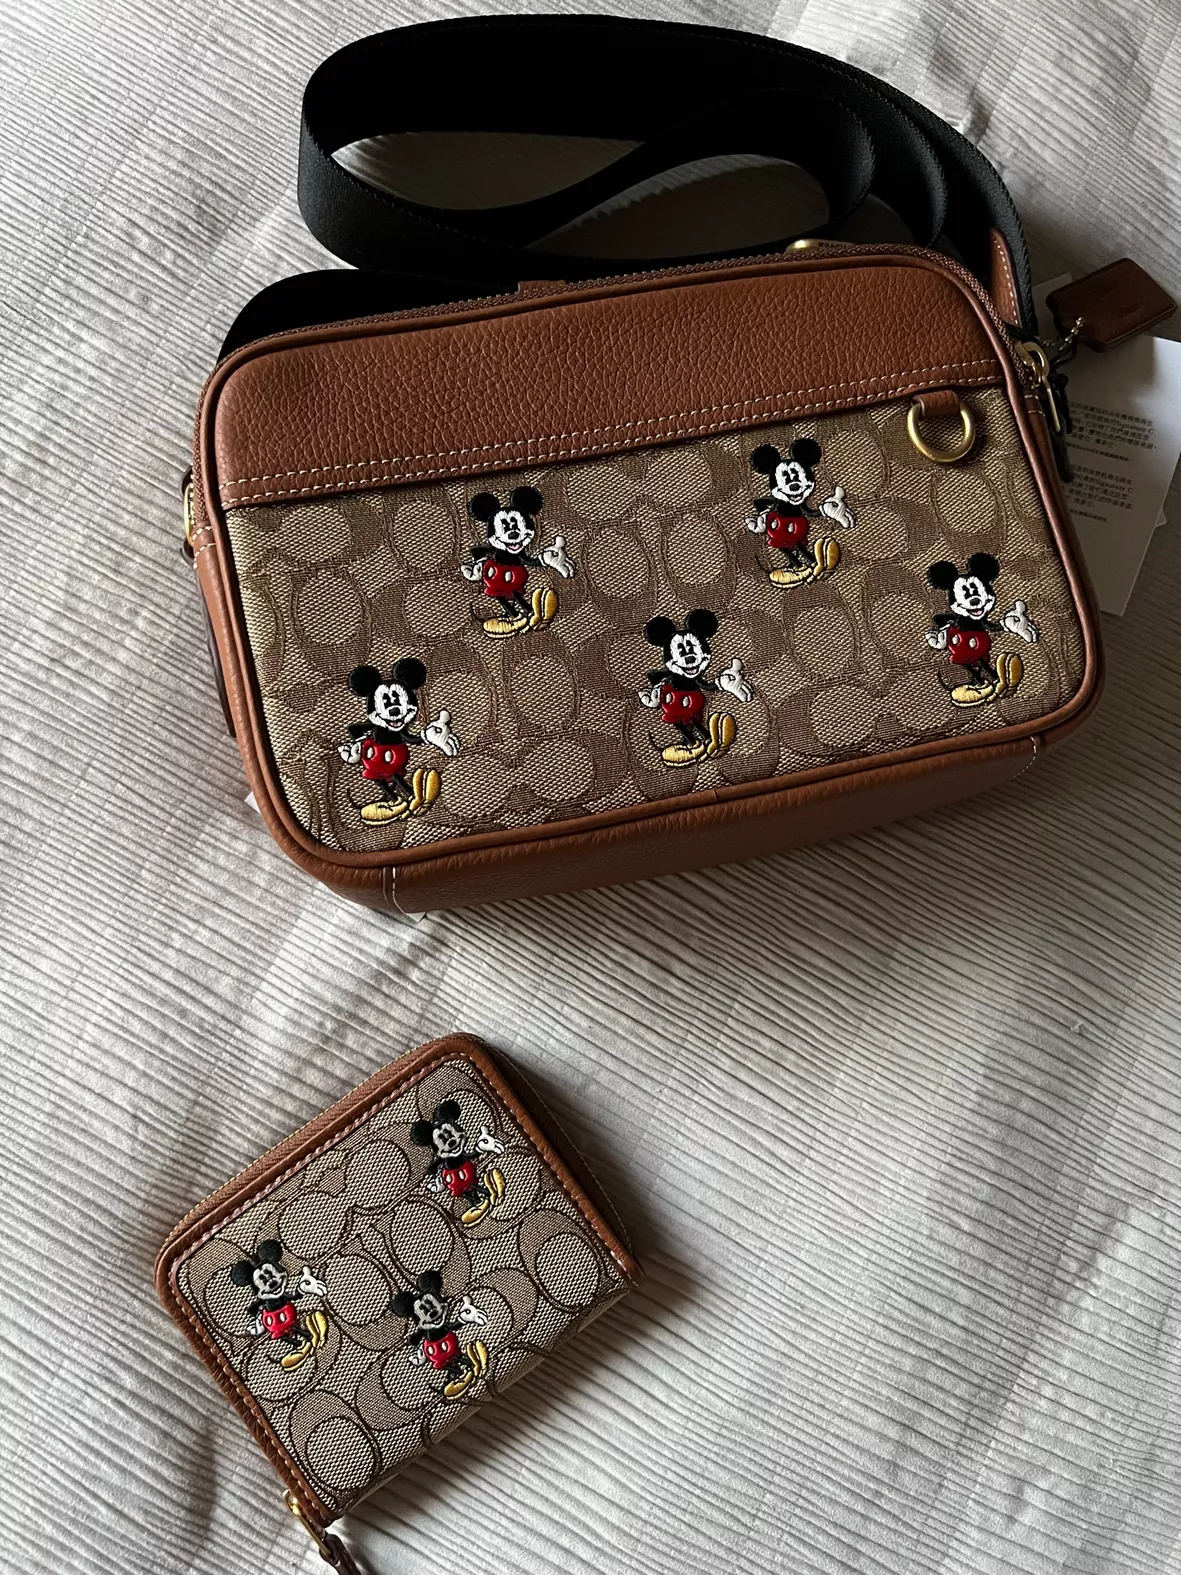 Add a Wow Factor to Your Favorite Bag with New Mickey Mouse Bag Charms  Designs from BaubleBar